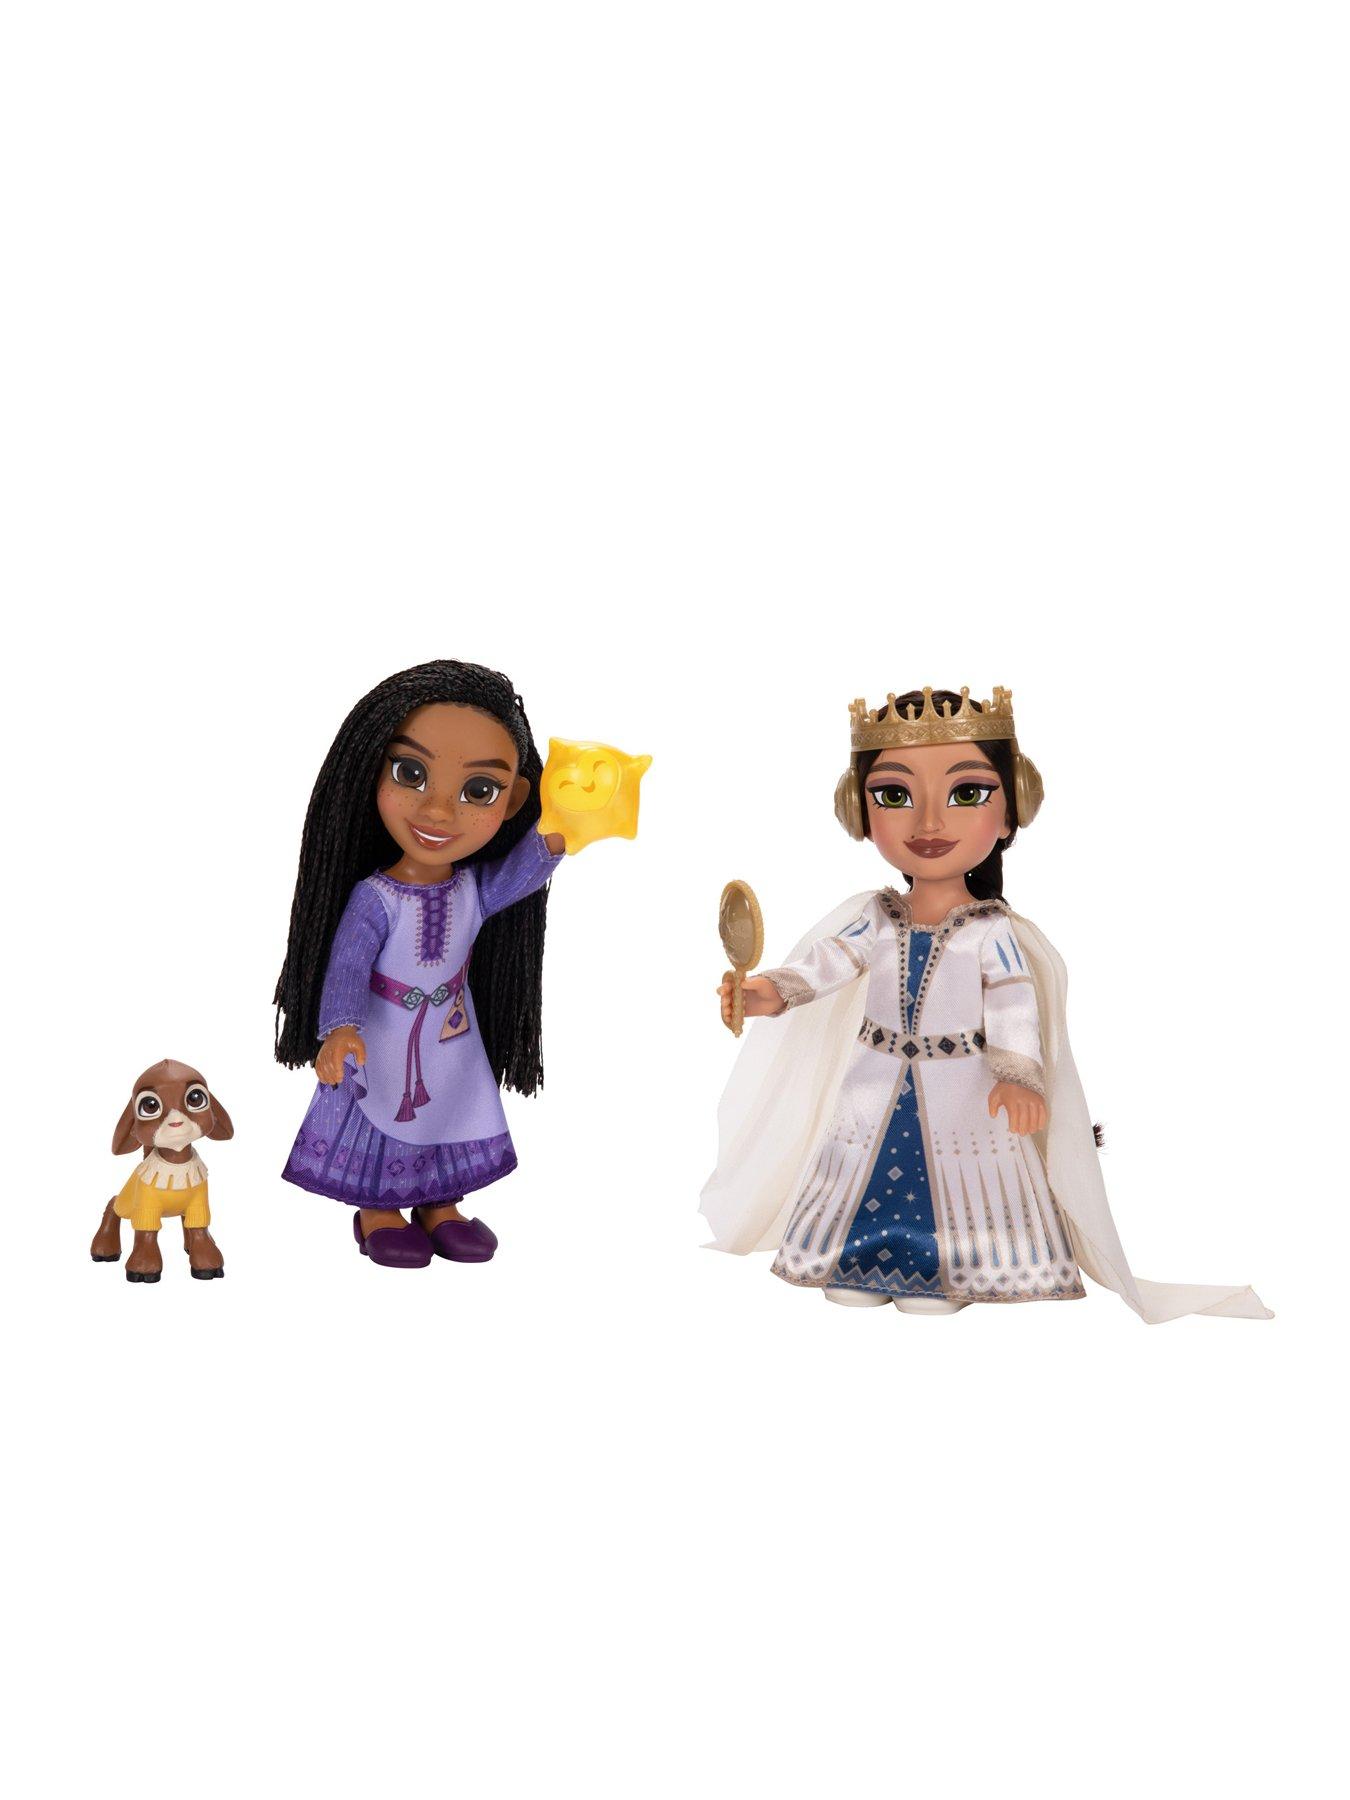 Disney's Wish Cottage Home Playset with Asha of Rosas Mini Doll, Star  Figure & 15+ Accessories 